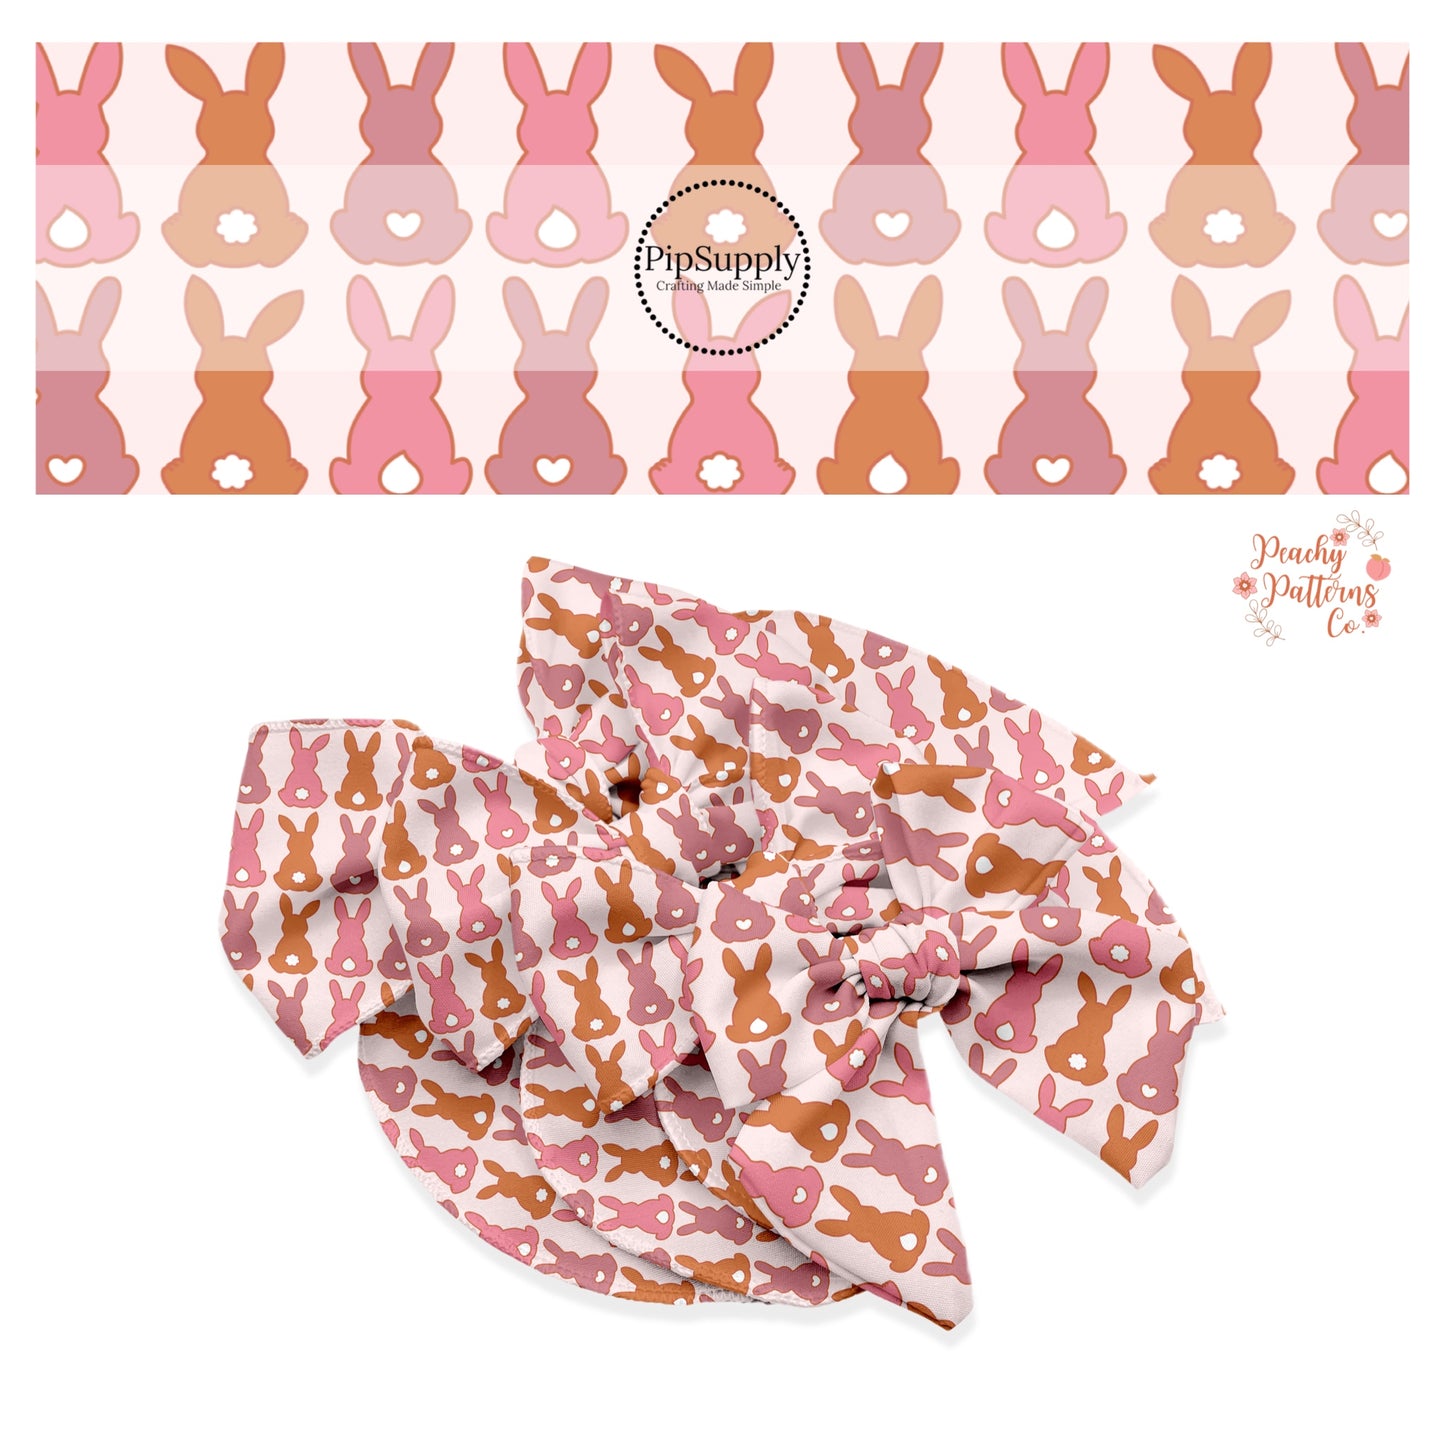 Mauve, pink, and rust bunnies with heart, teardrop, and fluffy bunny white tails on pink bow strips